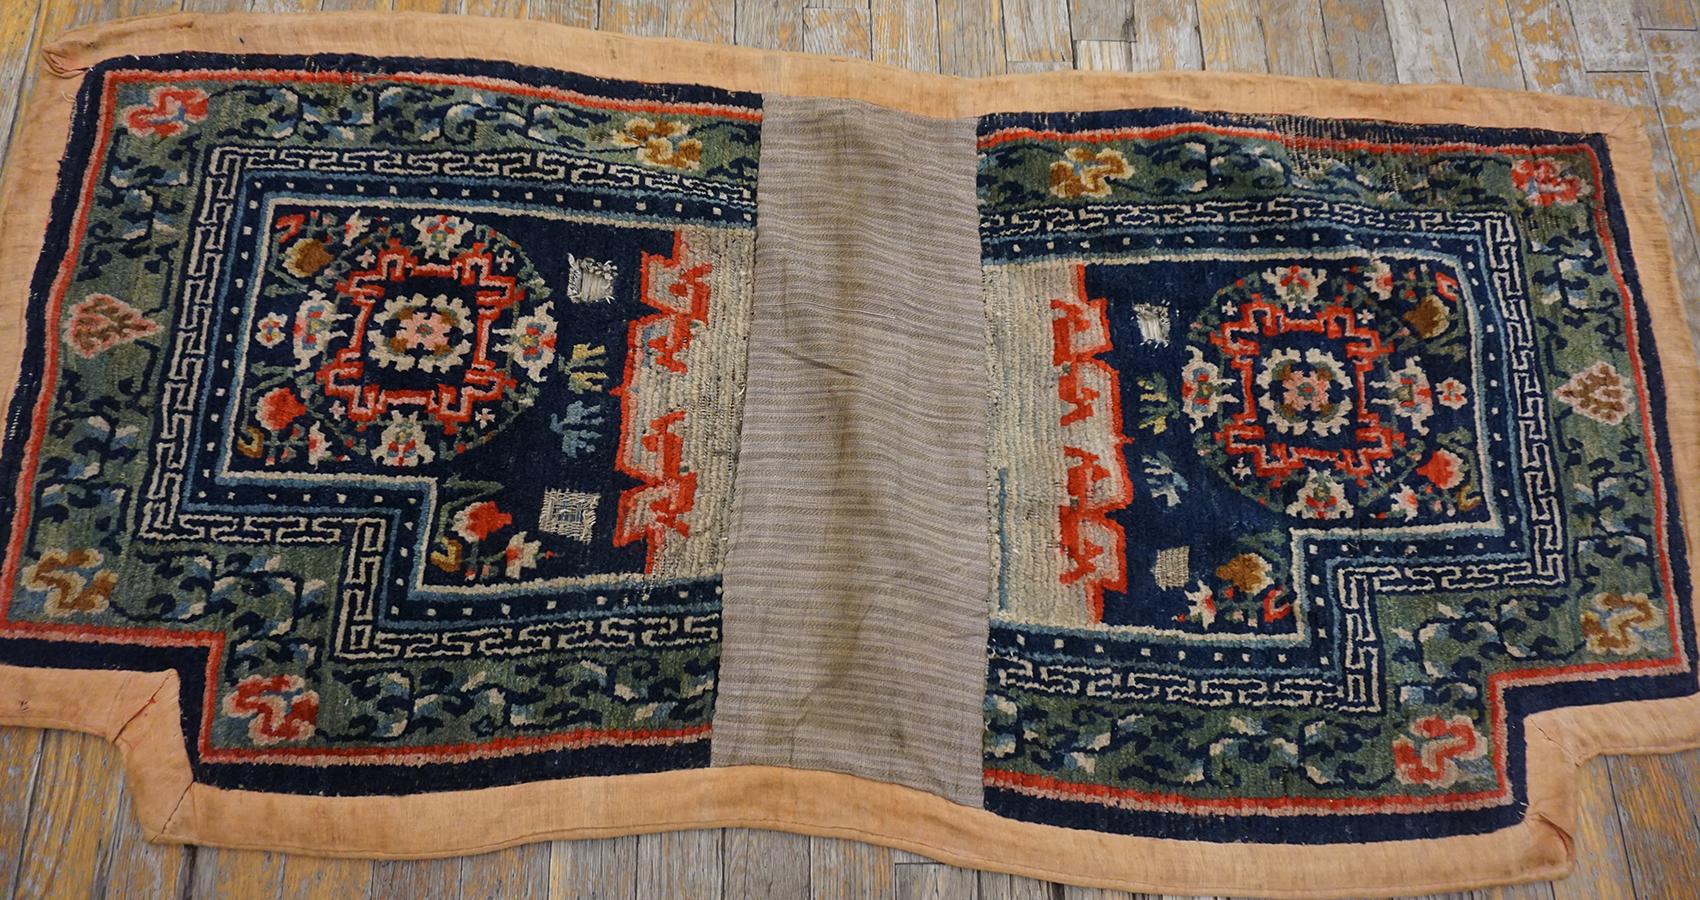 Antique Horse Cover rug, Size: 2'2